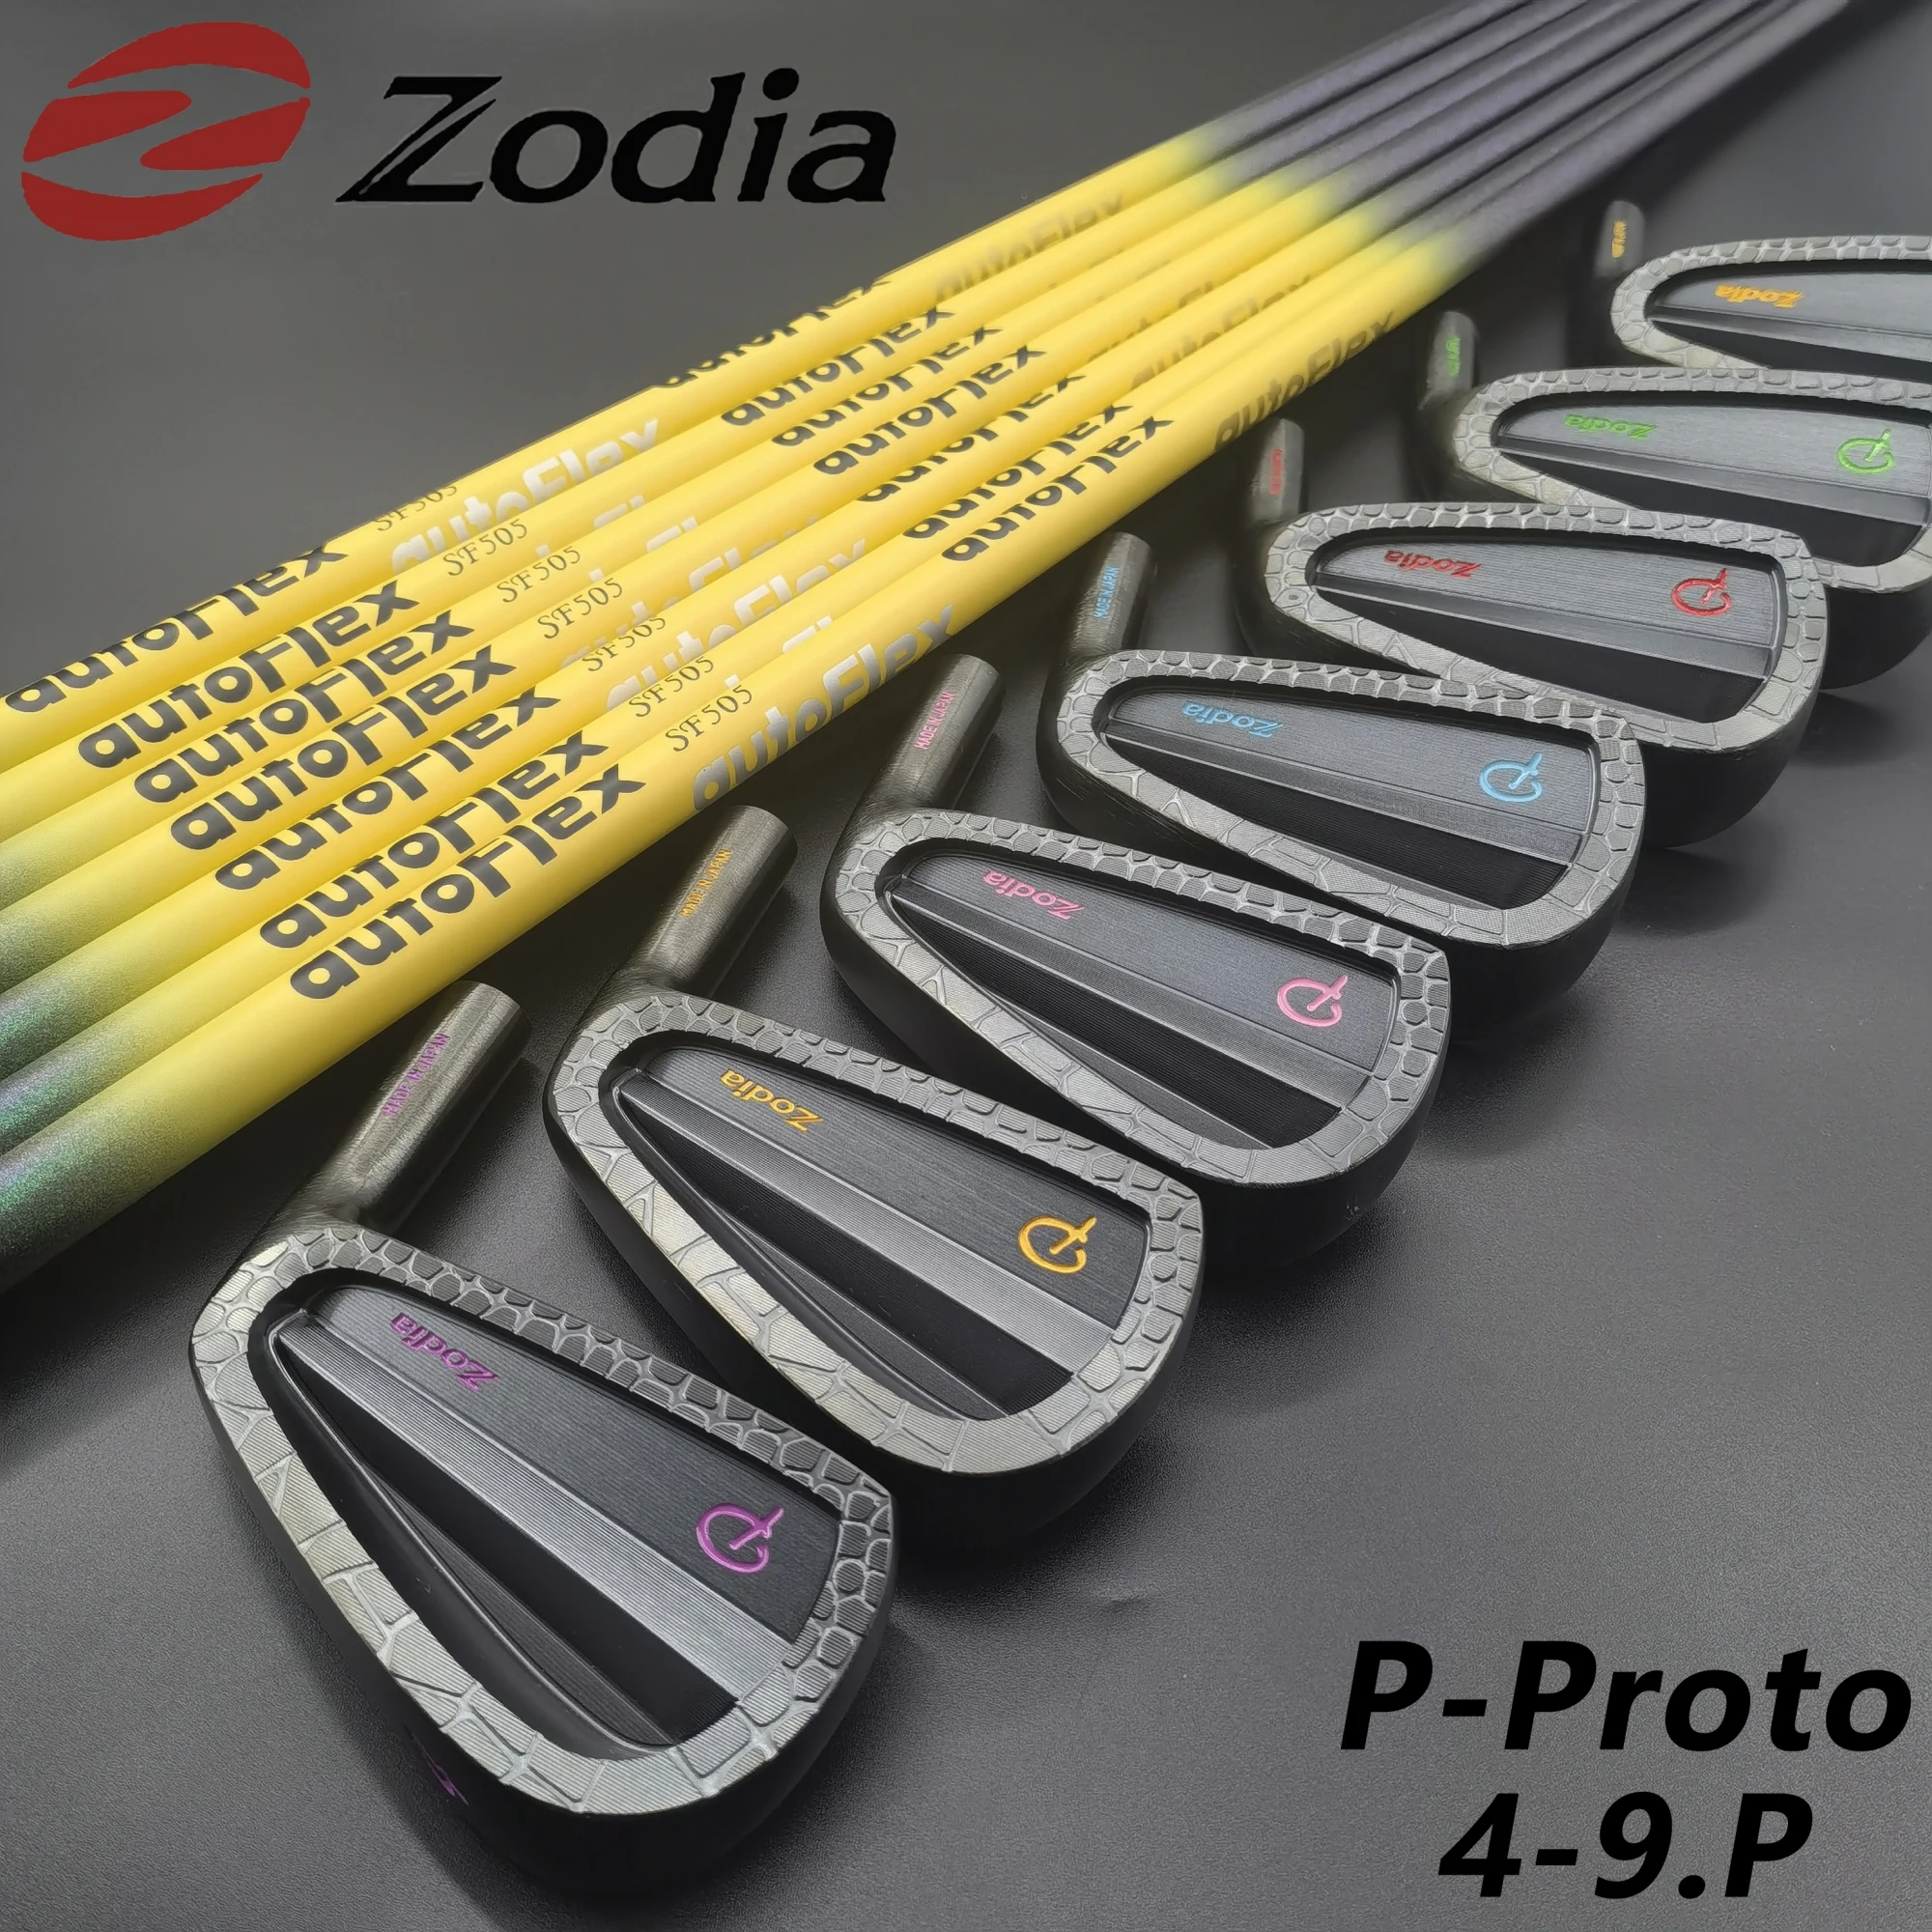 

New OEM ZODIA Golf Irons Limited P-Proto CB Black Irons Forged Set4 5 6 7 8 9 P With Steel Shaft 6pcs Golf Clubs